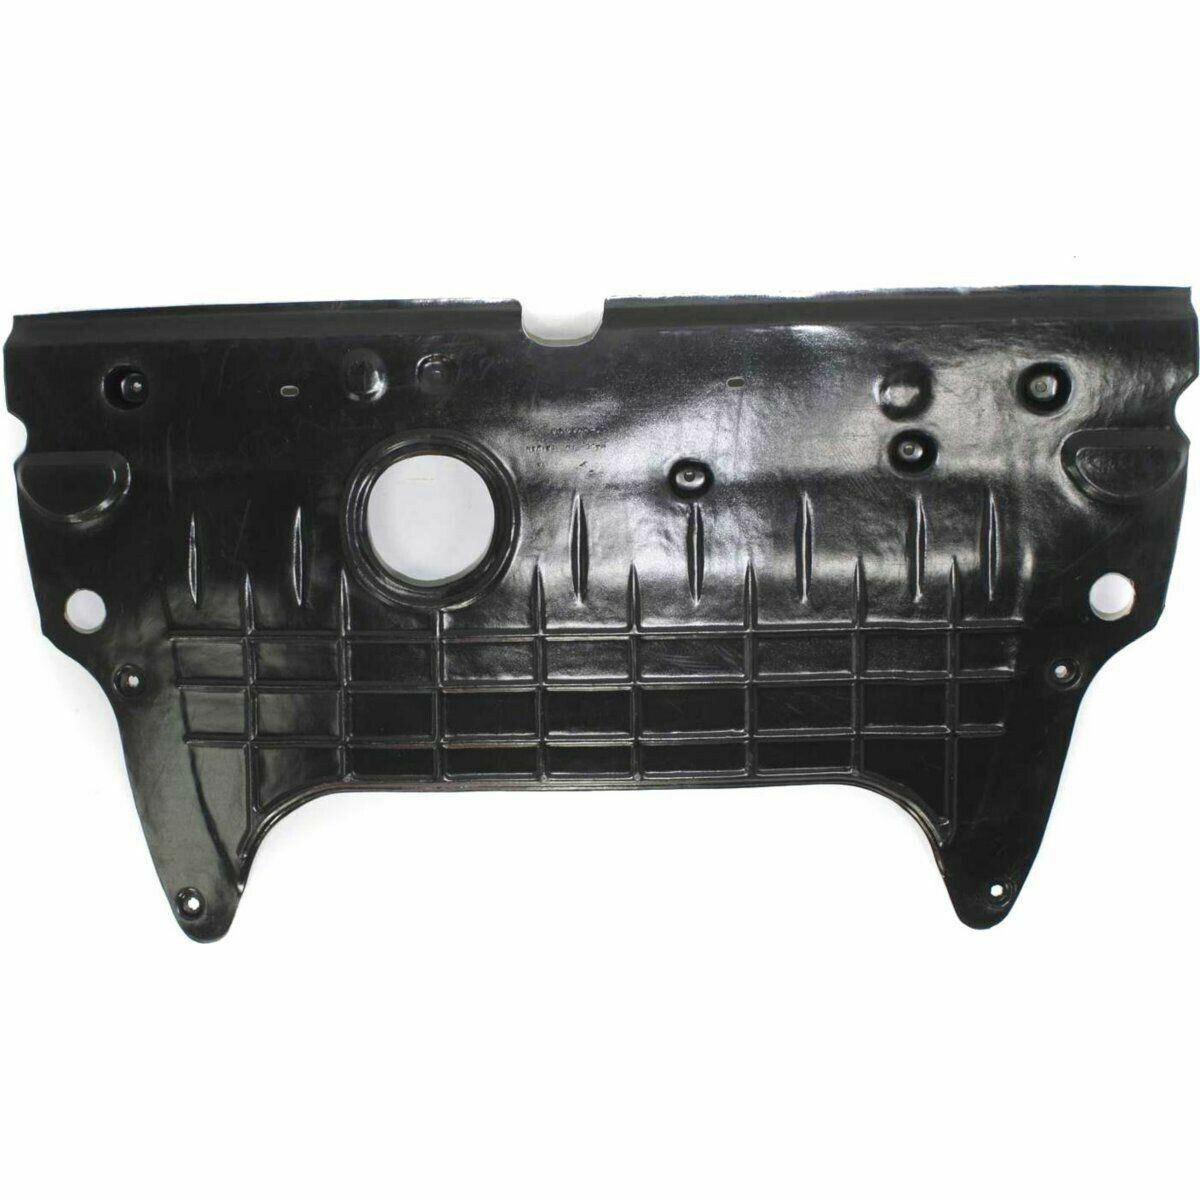 Lower Rear Engine Under Cover For 2006-2010 Sonata 2.4L HY1228122 291203K250